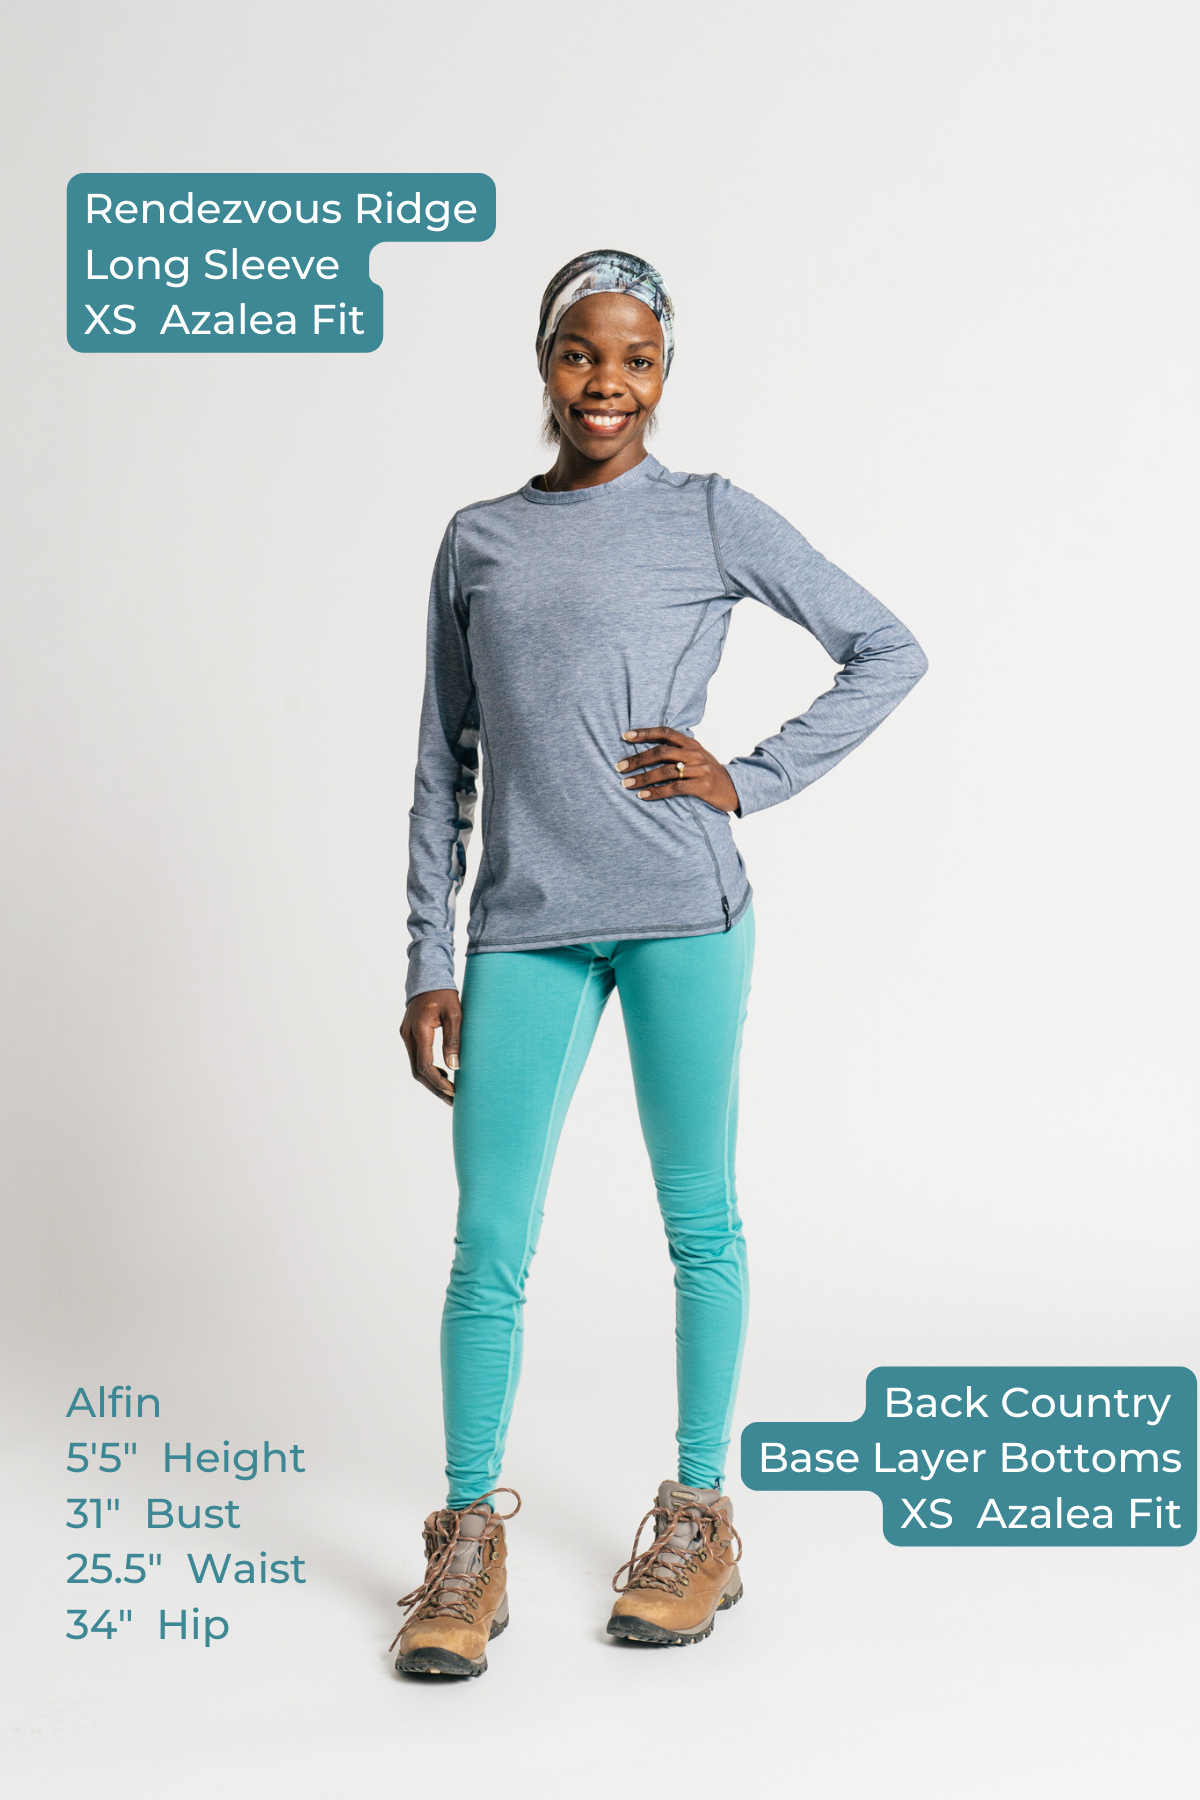 alpine fit base layer top and bottom with sizing model viewed from the front